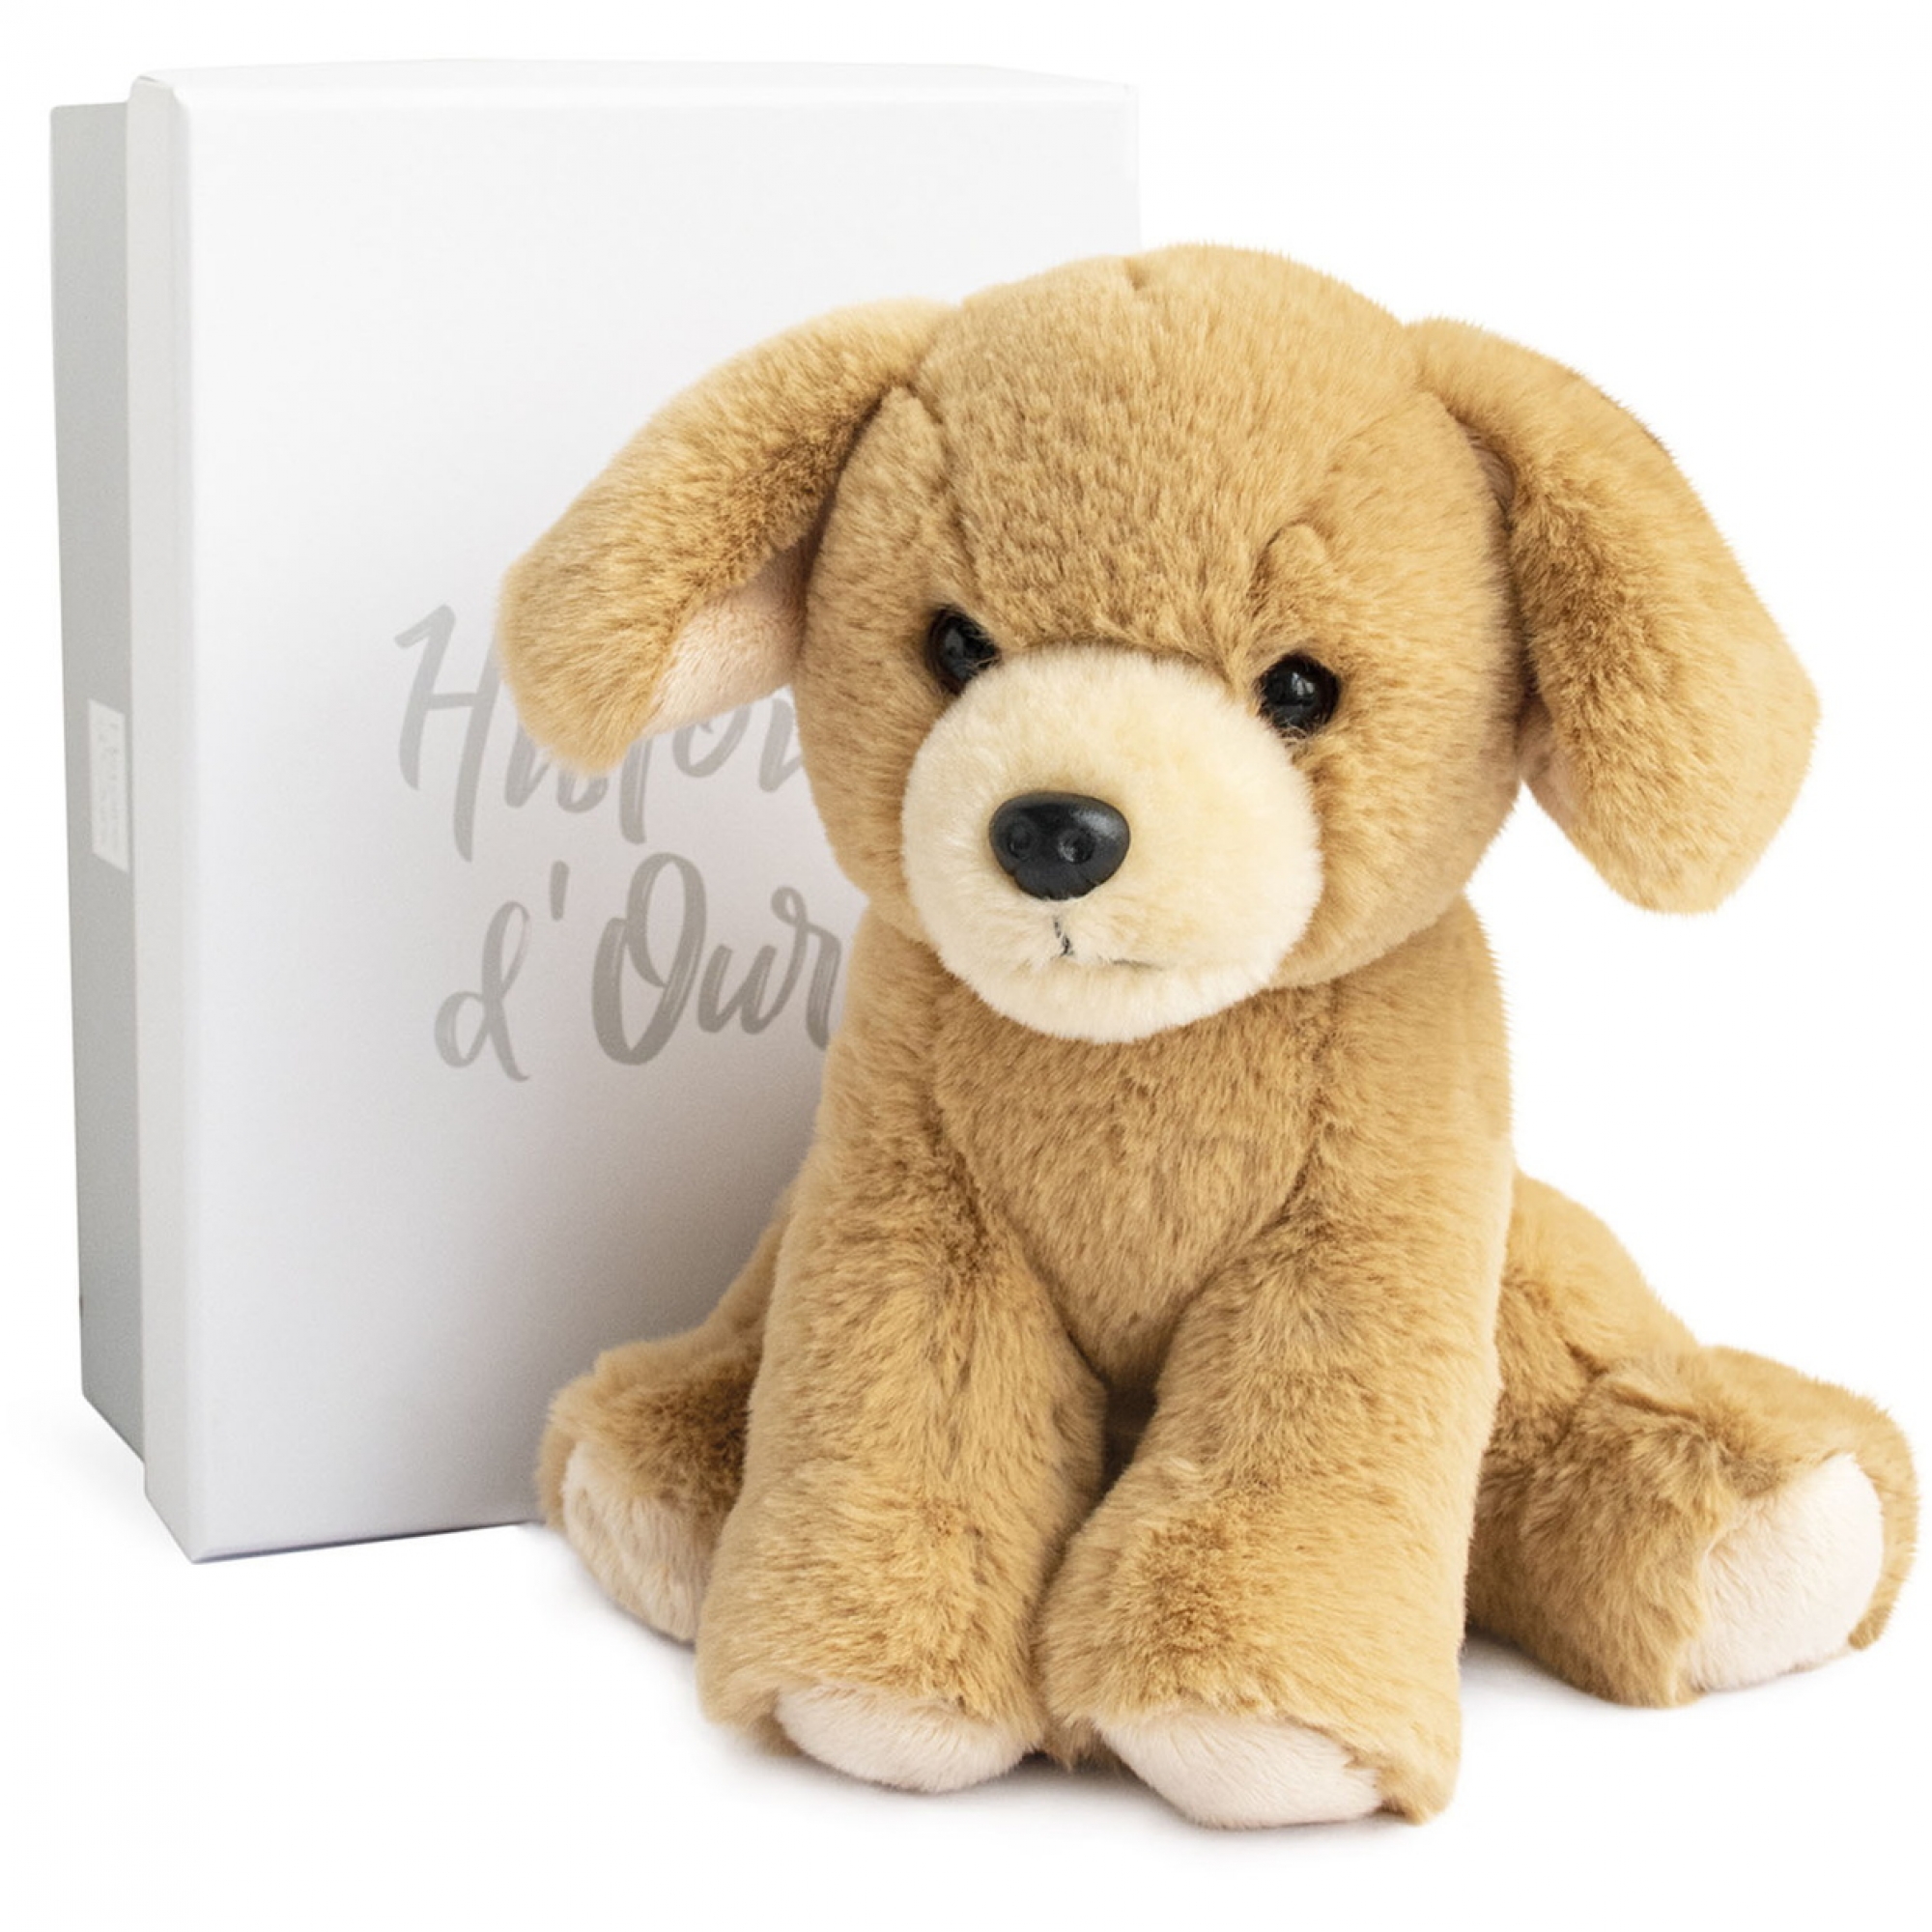 Histoire D Ours Peluche Bebe Chien Miel Made In Bebe